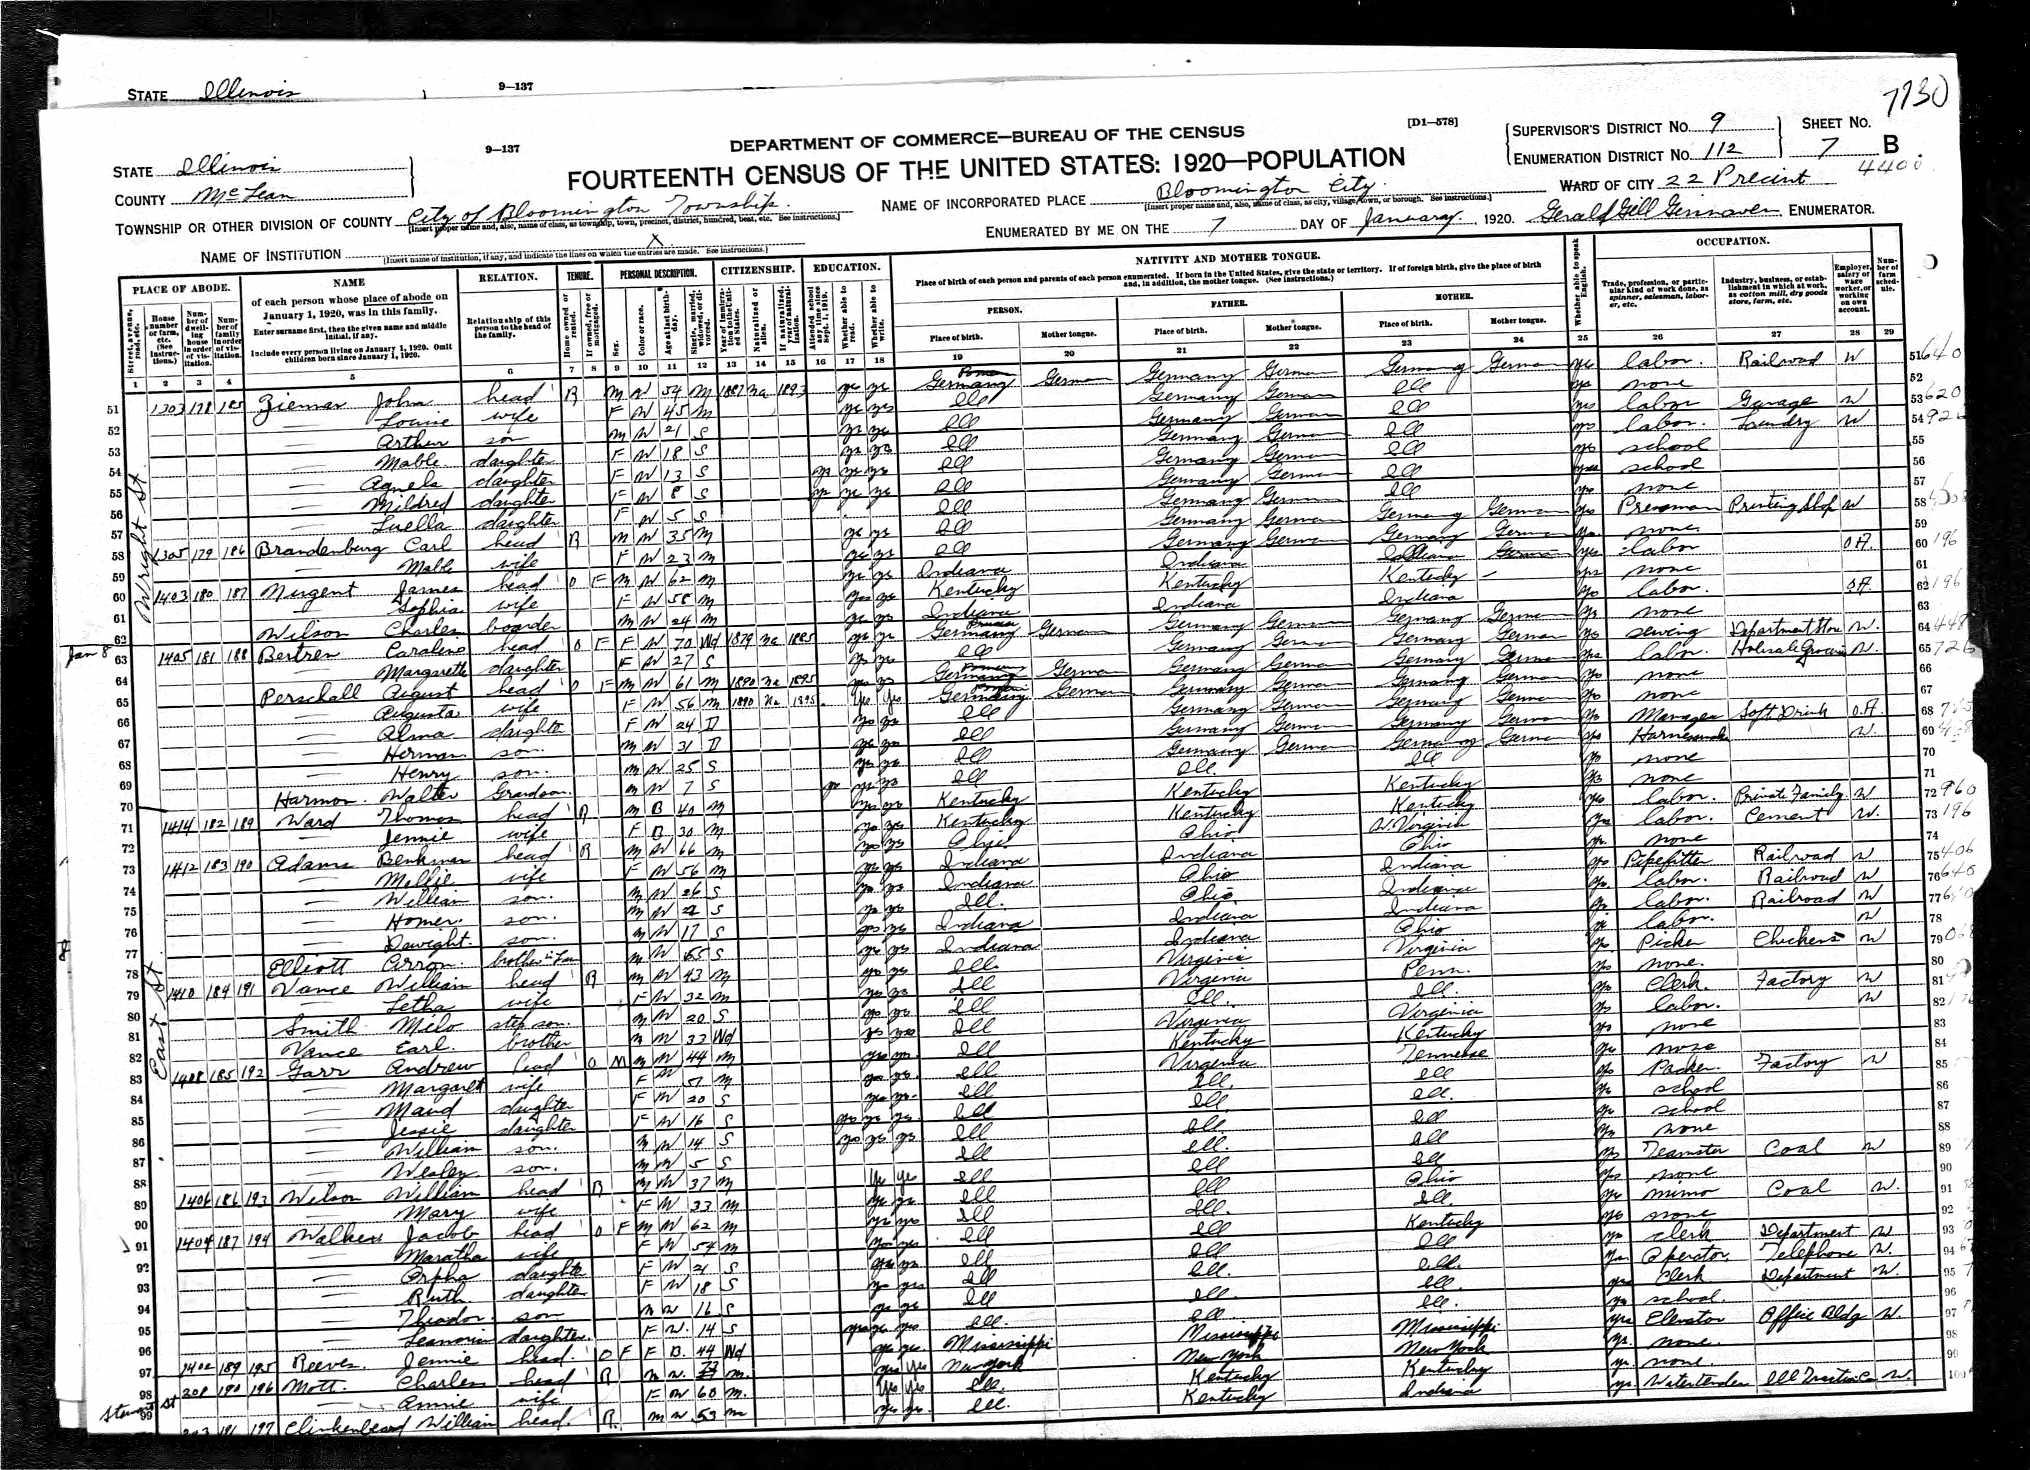 Jacob A. and Martha (Finley) Walker, 1920 McLean County, Illinois, census